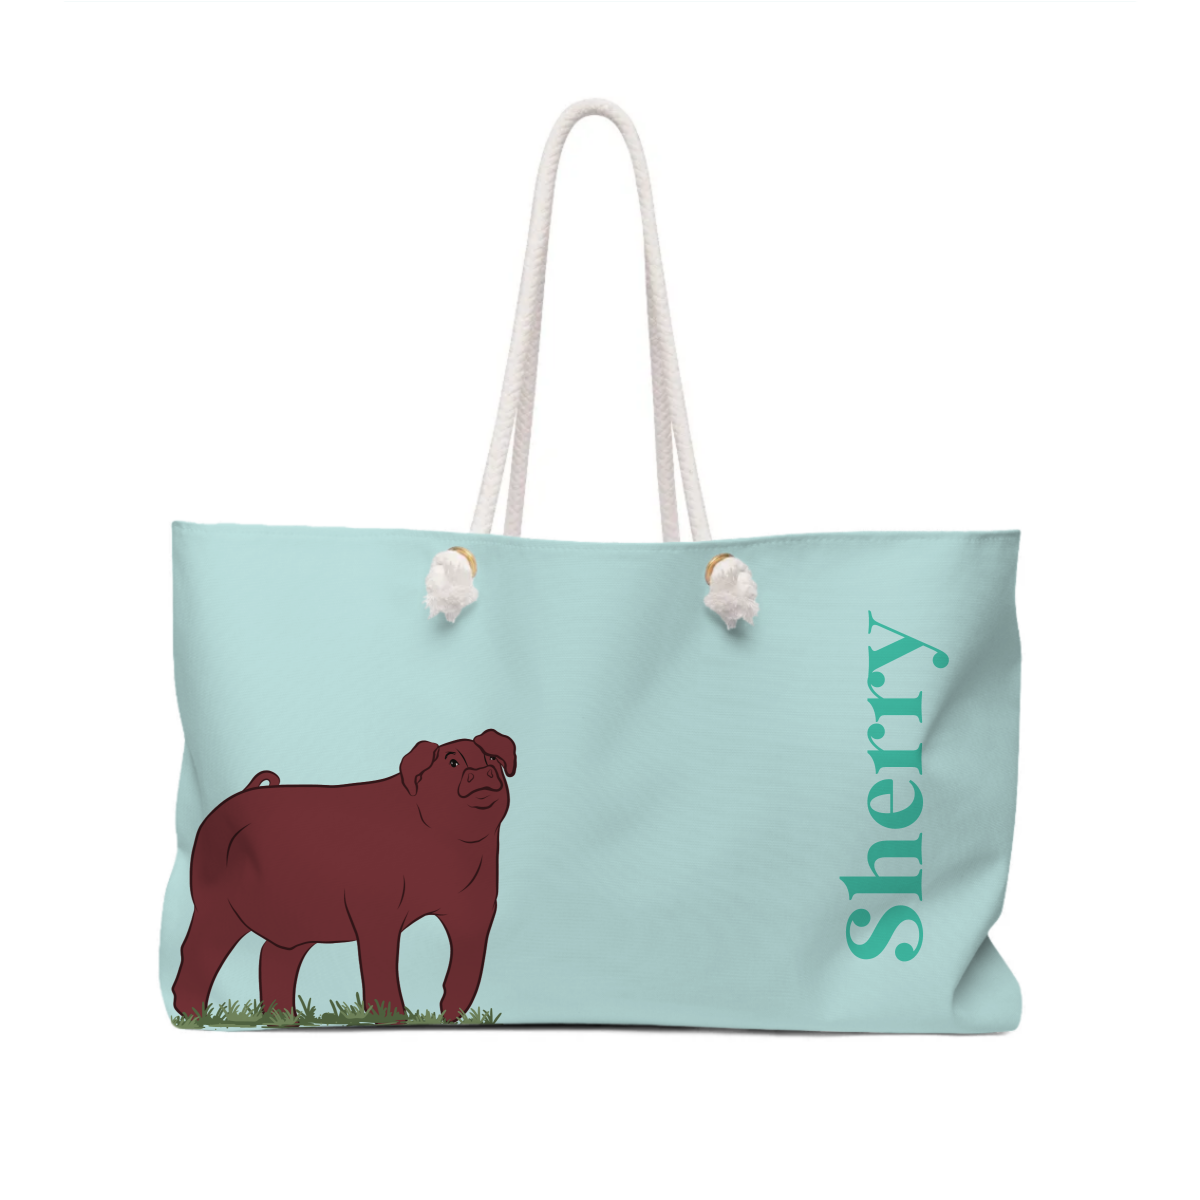 Personalized-Livestock-Tote Bag - Solid